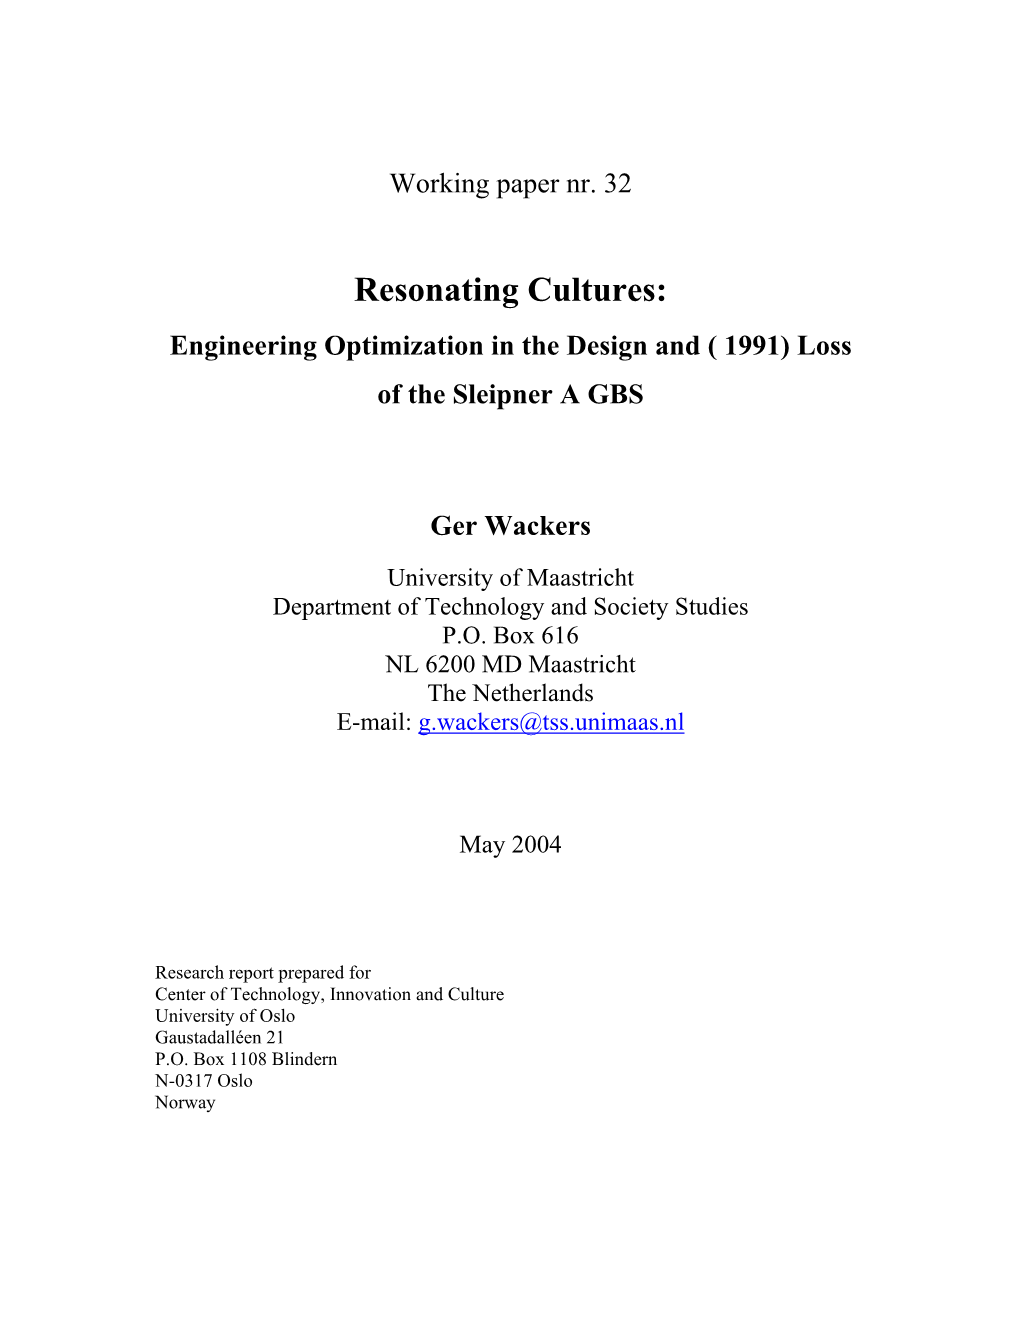 Resonating Cultures: Engineering Optimization in the Design and ( 1991) Loss of the Sleipner a GBS